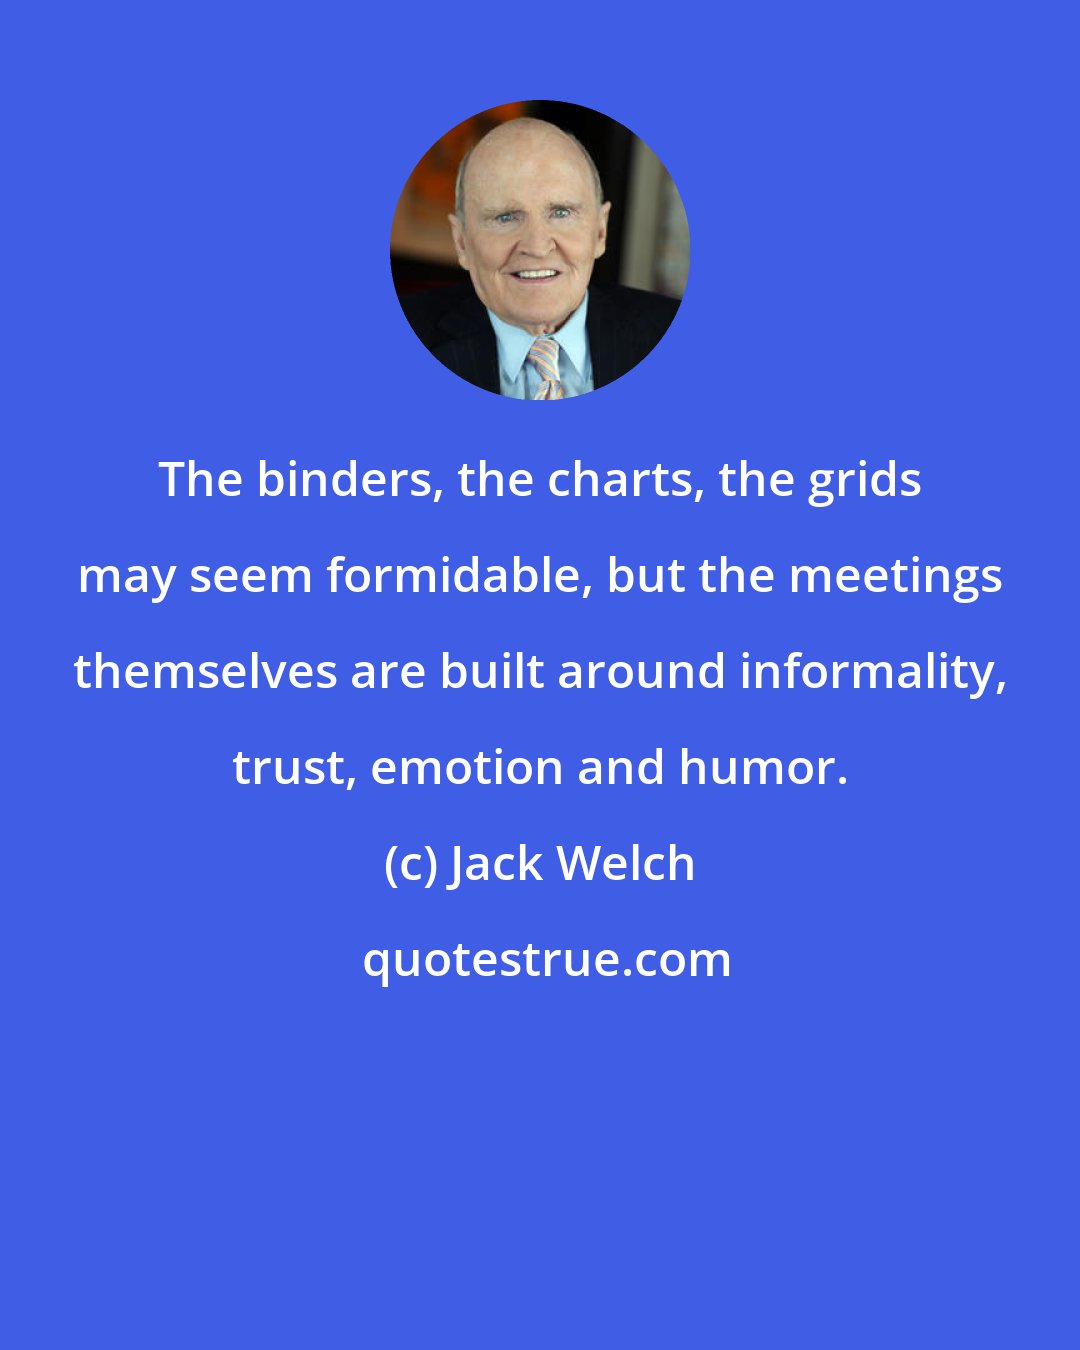 Jack Welch: The binders, the charts, the grids may seem formidable, but the meetings themselves are built around informality, trust, emotion and humor.